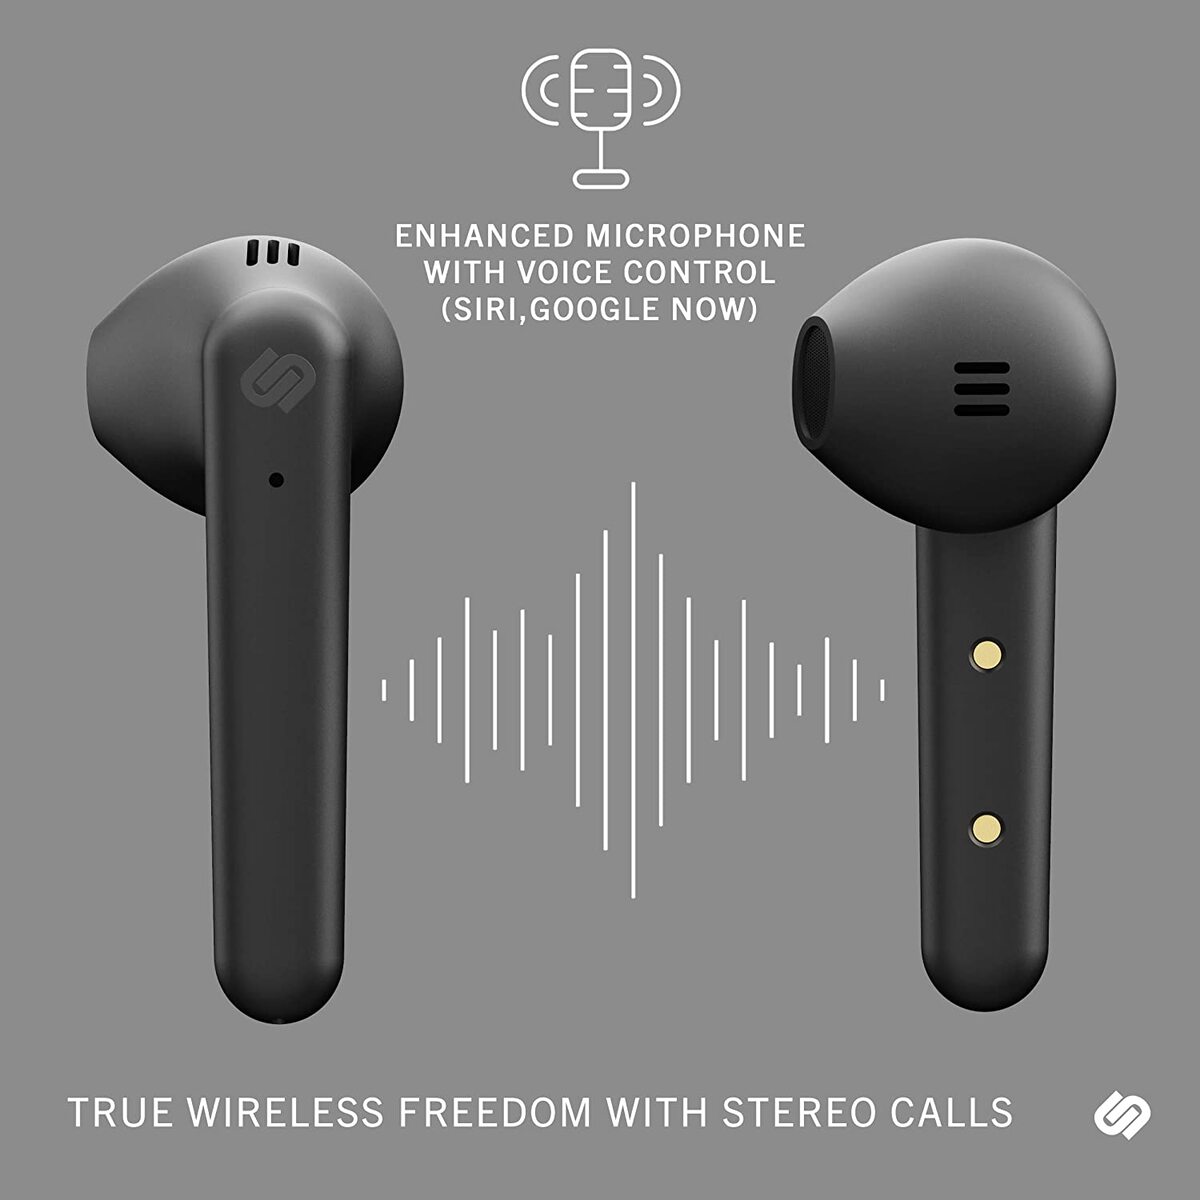 UAE Playtime, Clear Active Price Microphones True Earphones, at Blue Calling, For Headphones With Online True Controls Bluetooth Urbanista 25 6 | Earbud Wireless Earbuds Lulu Cancelling, 5.0 Touch Wireless Best Hours Noise | & London